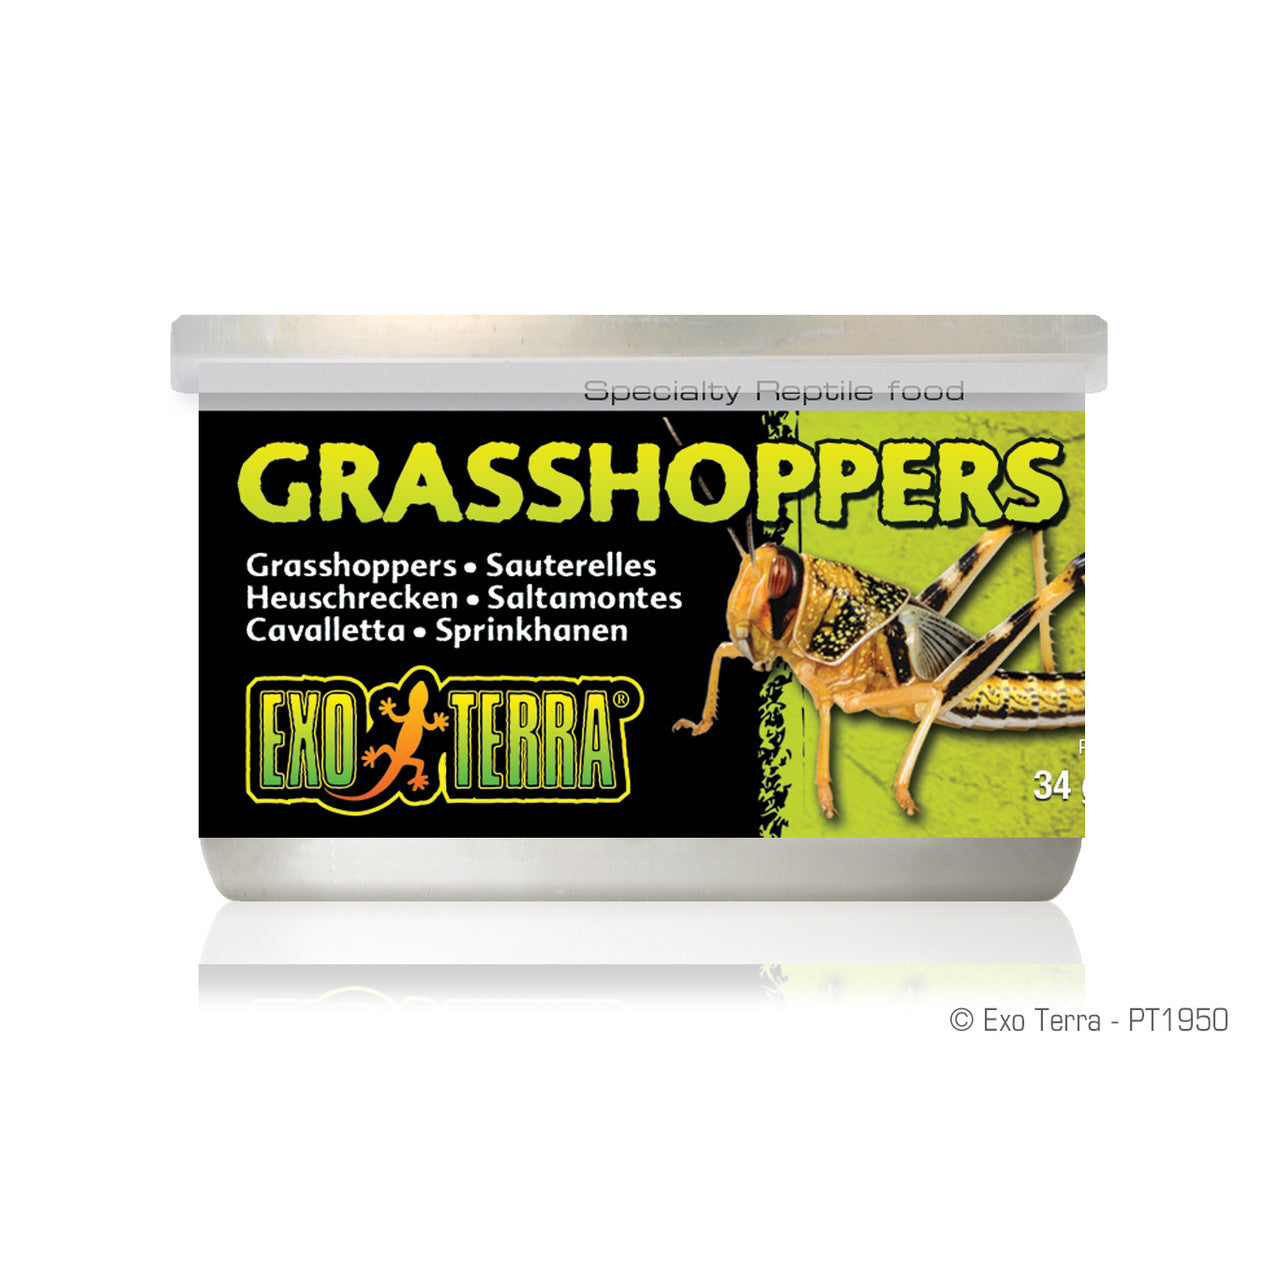 Exo Terra Canned Grasshoppers, 1.2 oz 015561219501